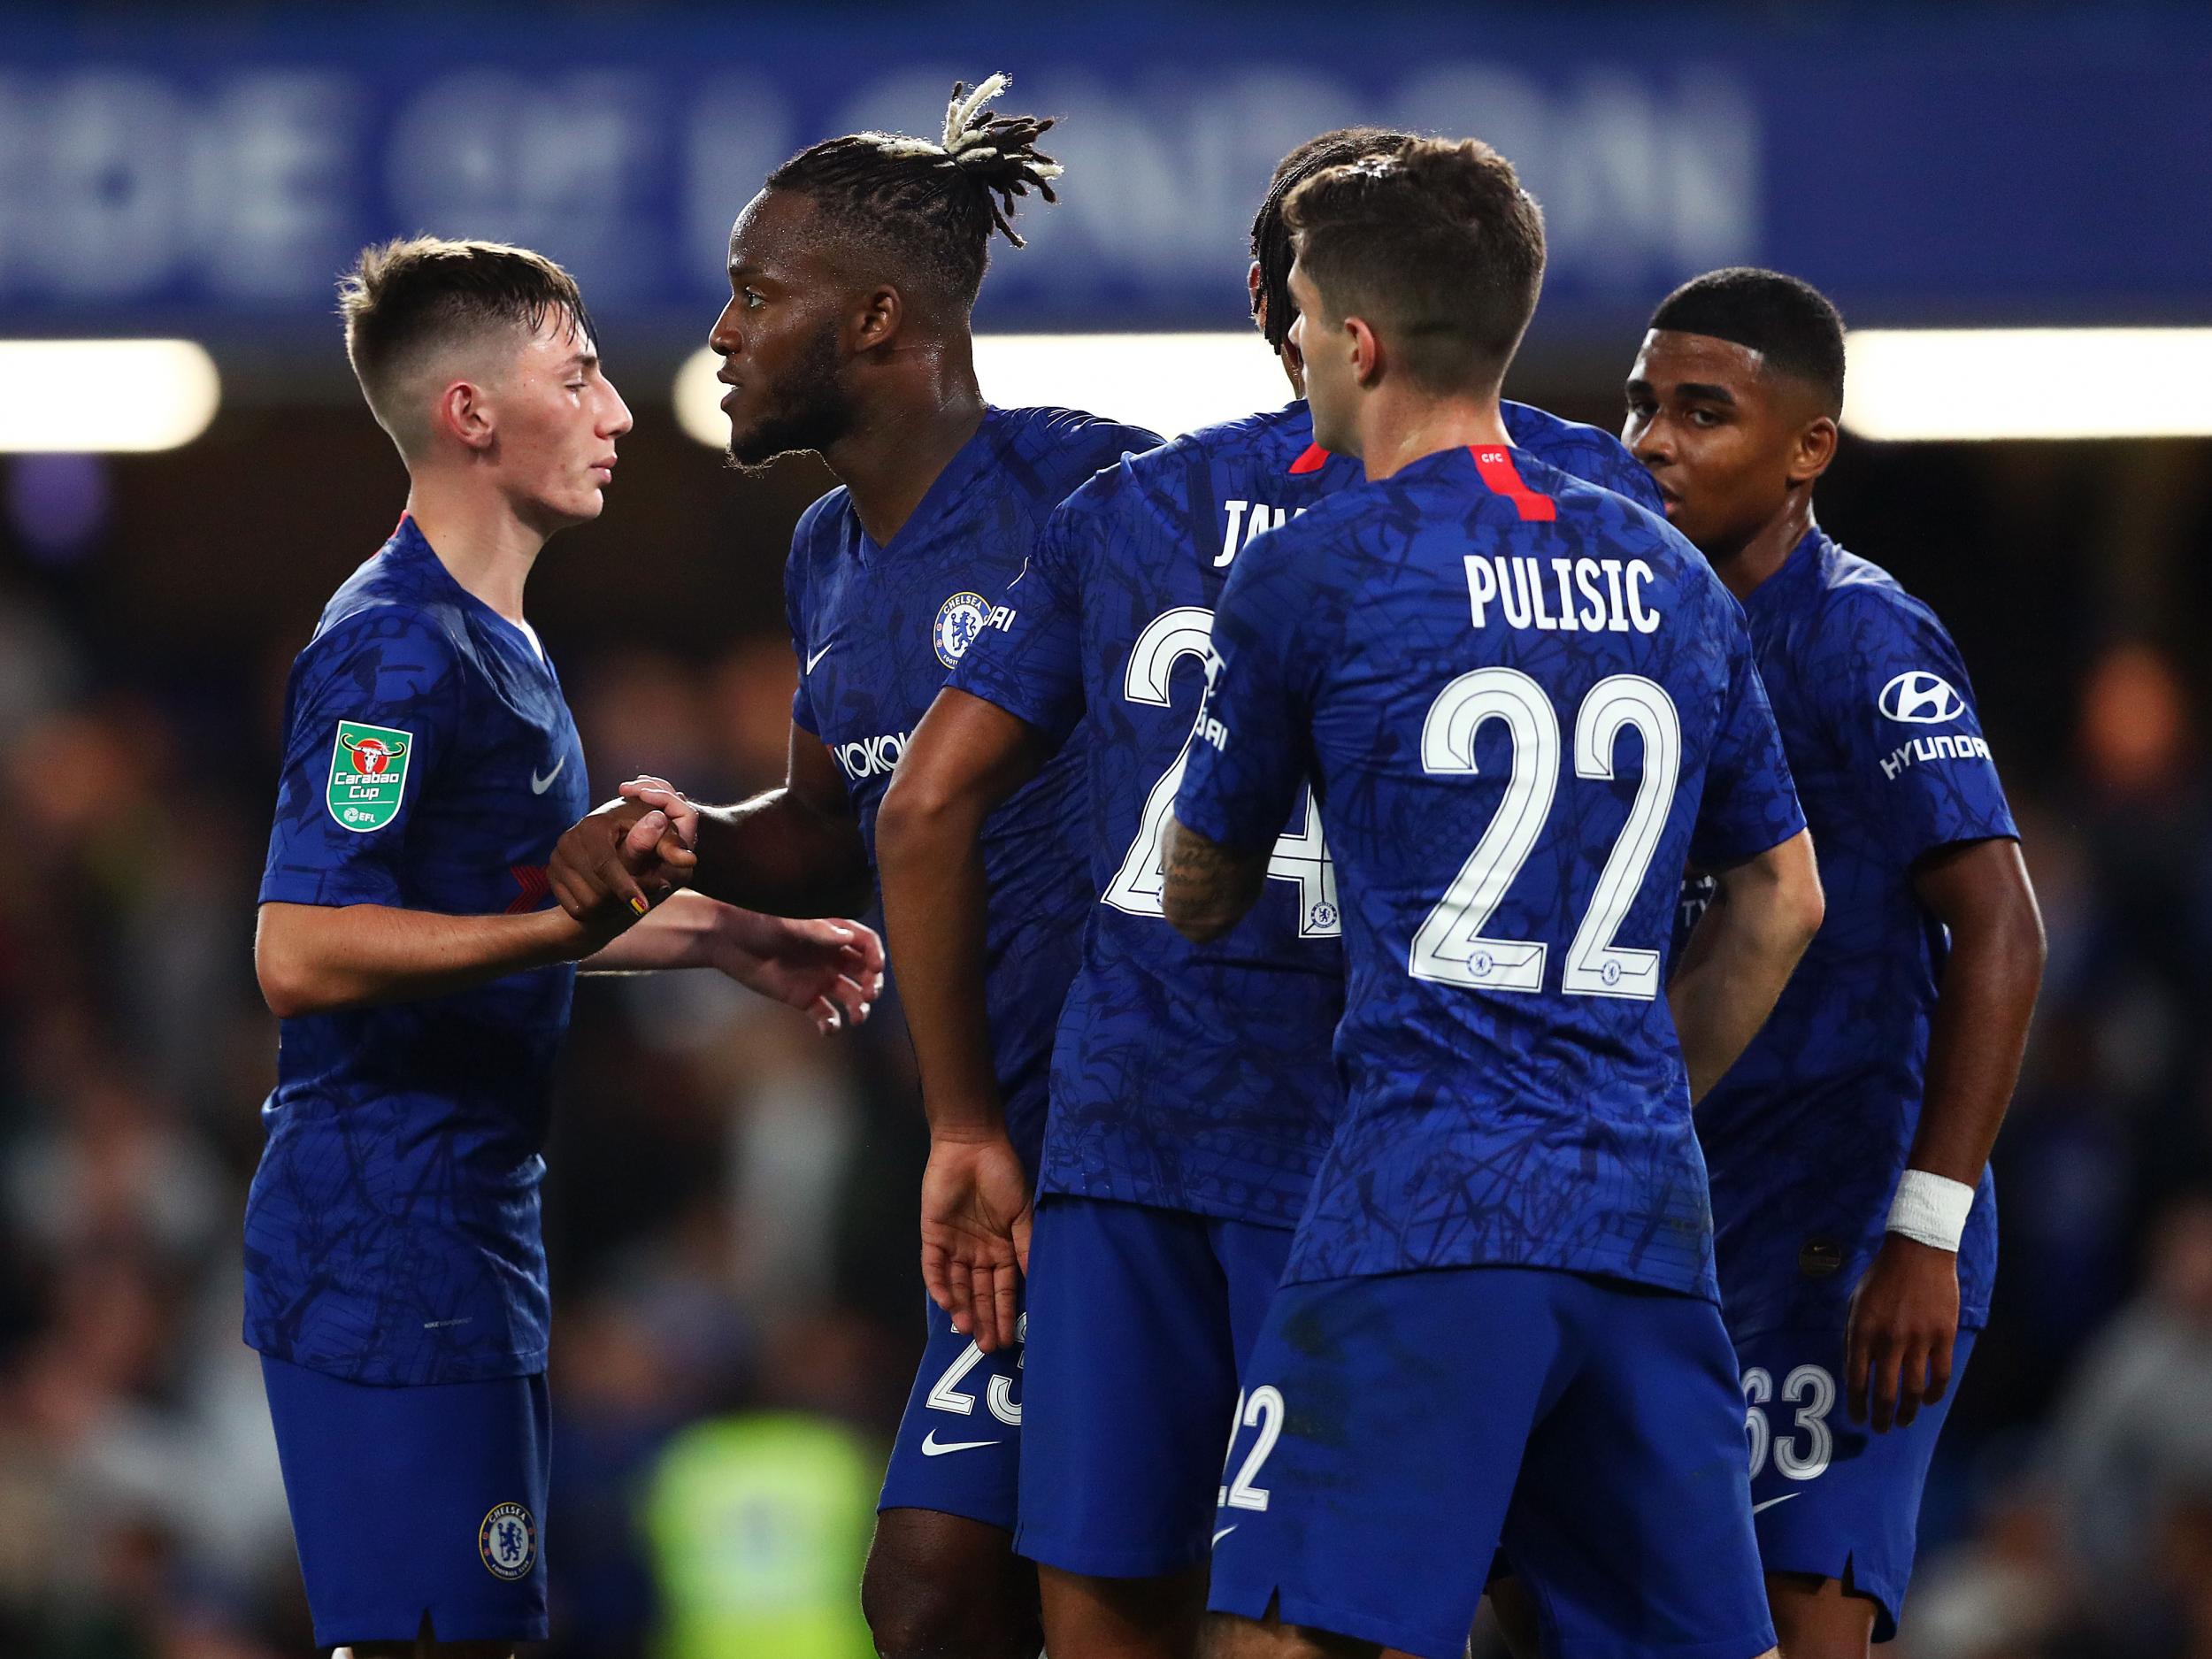 Billy Gilmour (left) made his full Chelsea debut in their comfortable win over Grimsby